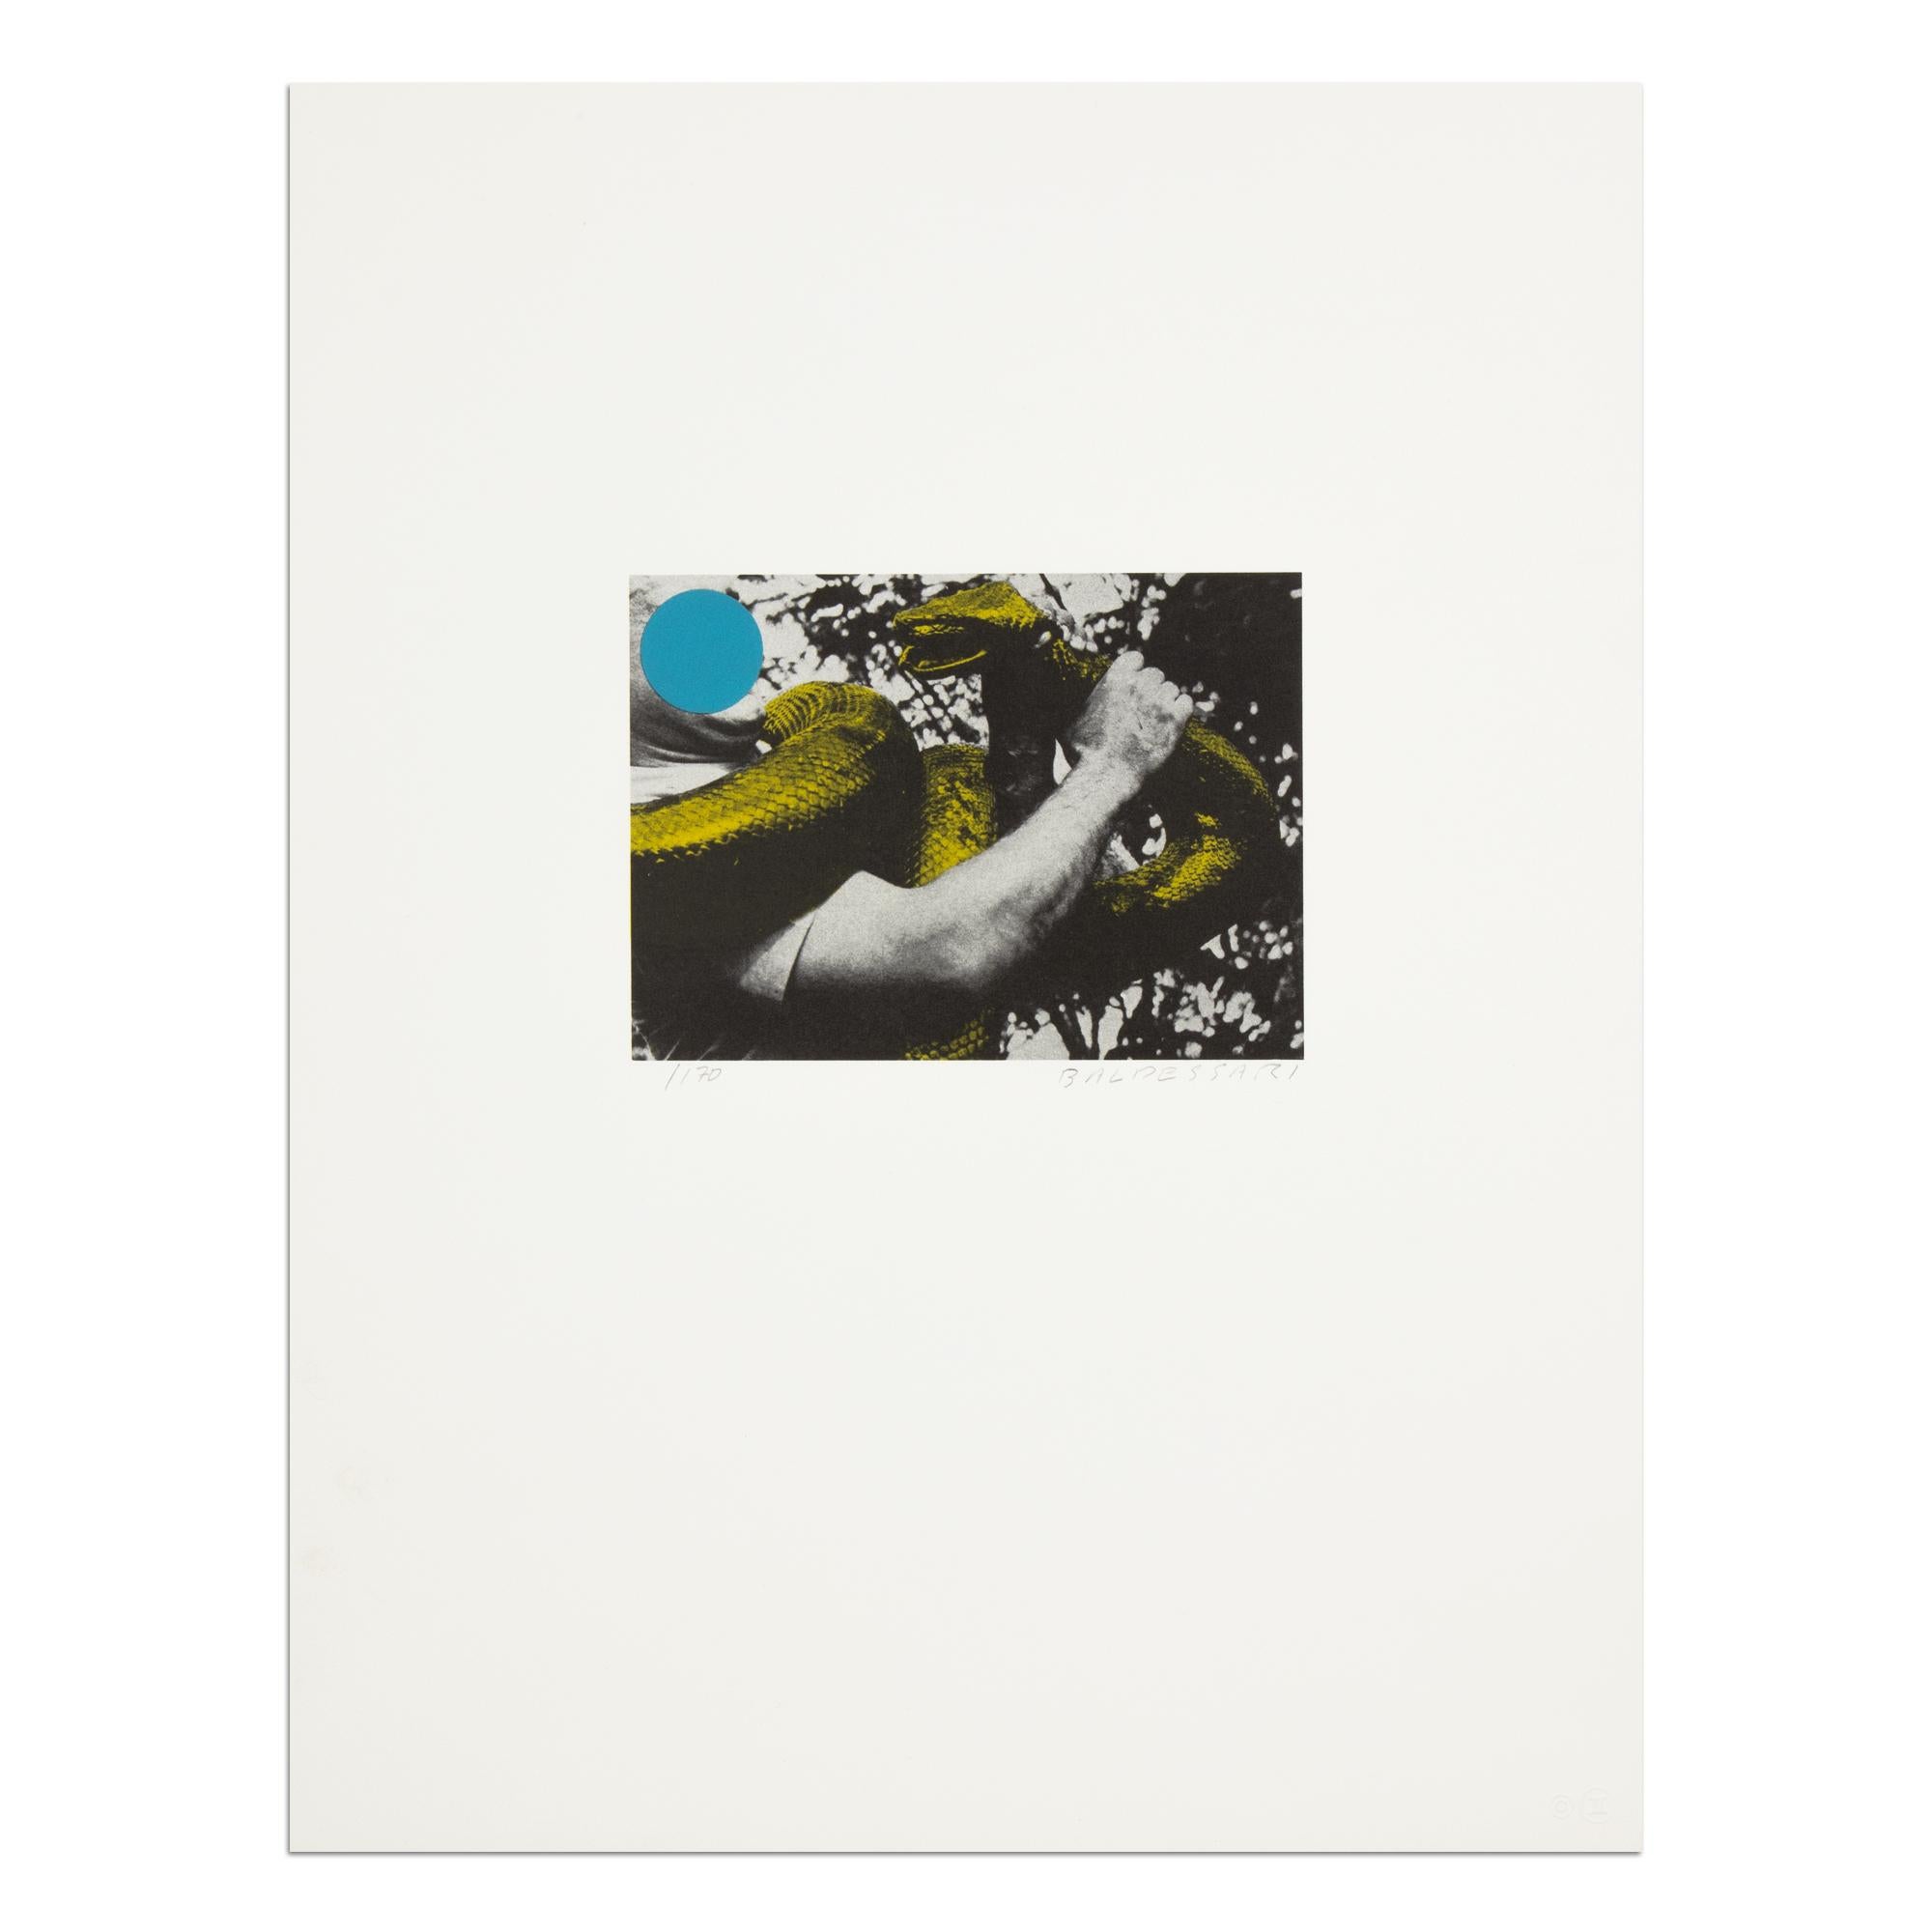 John Baldessari (American, 1931-2020)
Man with Snake (Blue and Yellow), 1990
Medium: Lithograph in colors, on wove paper
Dimensions: 45.7 x 35.5 cm (18 x 14 in)
Edition of 170: Hand-signed and numbered in pencil
Catalogue raisonné: Hurowitz